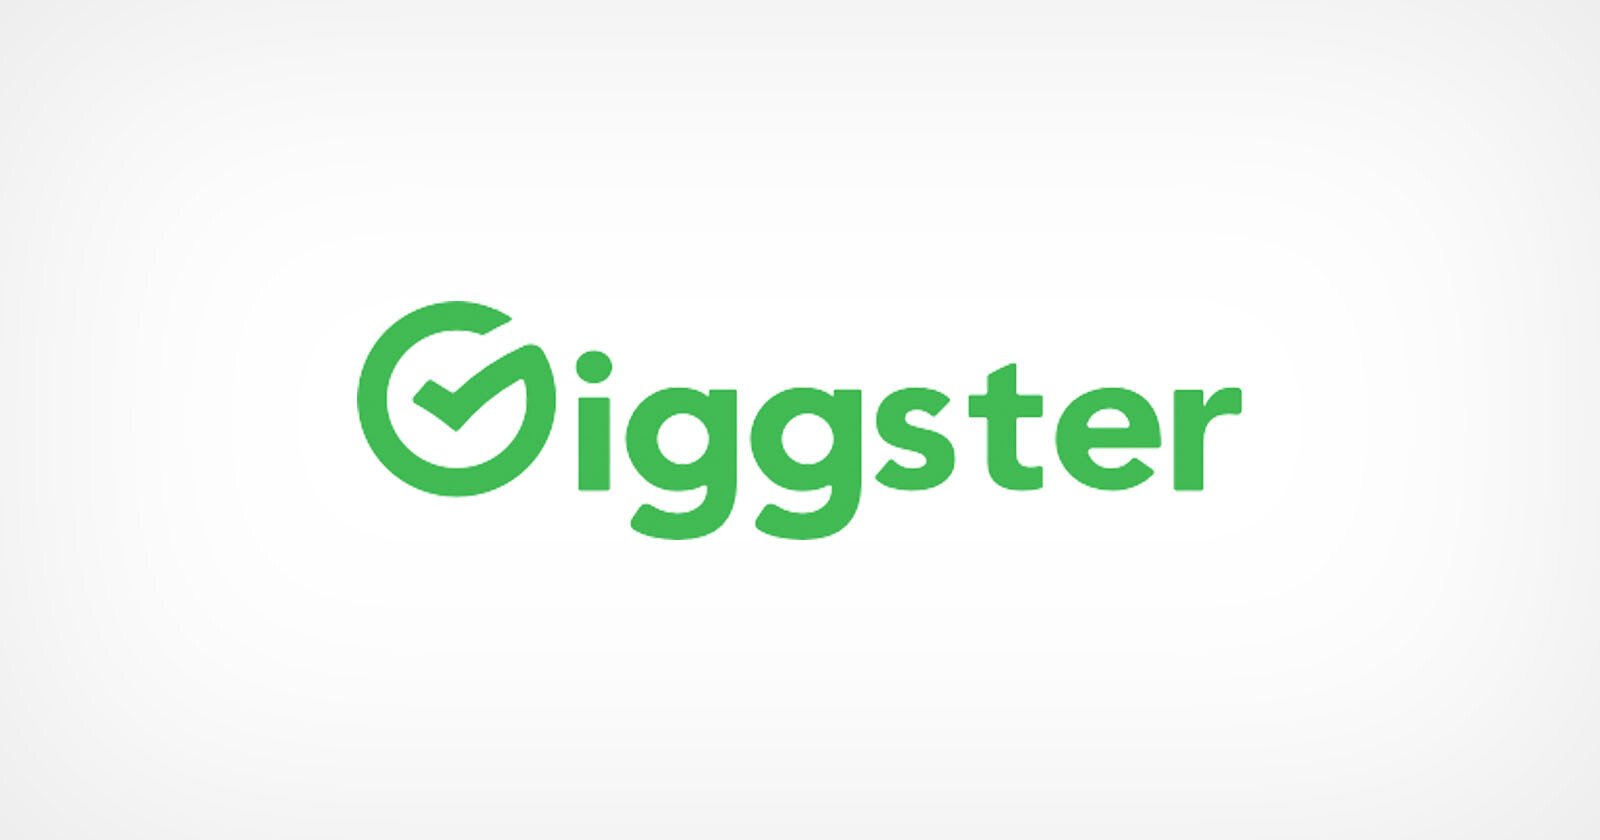  giggster has acquired imaging resource from bebop 